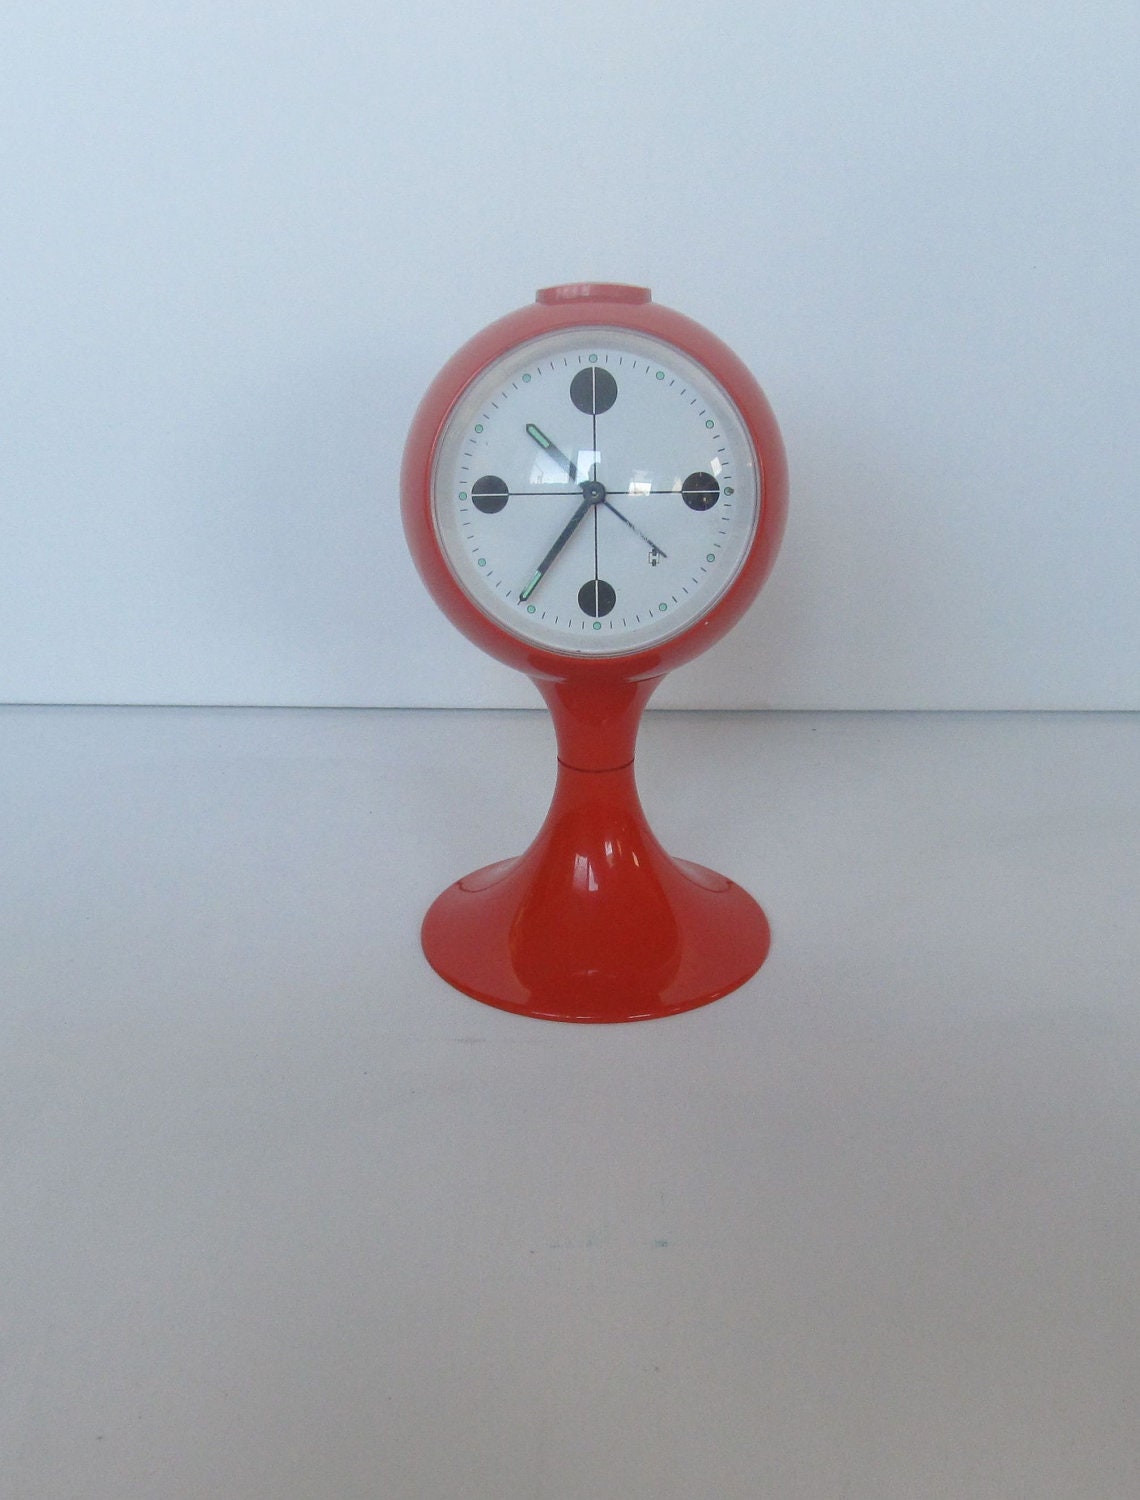 alarm clock, pedestal tulip shape, Space age era plastic alarm clock from the early 1970s made in Germany